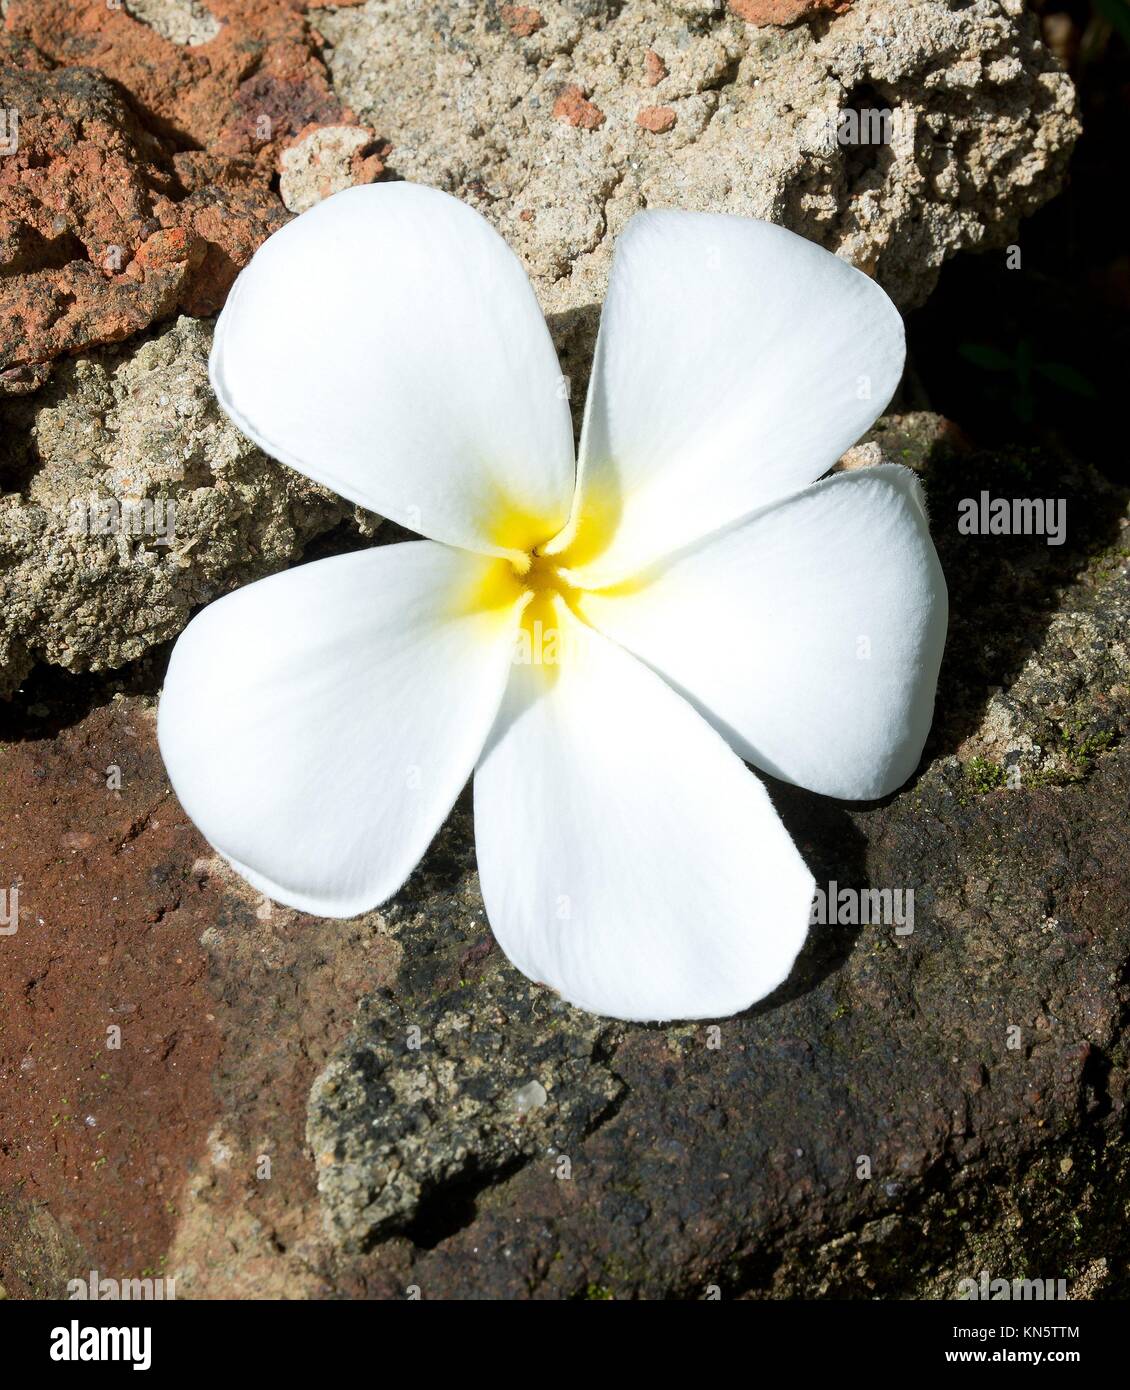 Temple Tree Flower. The flower is seen as the symbol of the fragile human life out of which should come the fragrance of devotion that allows the Stock Photo